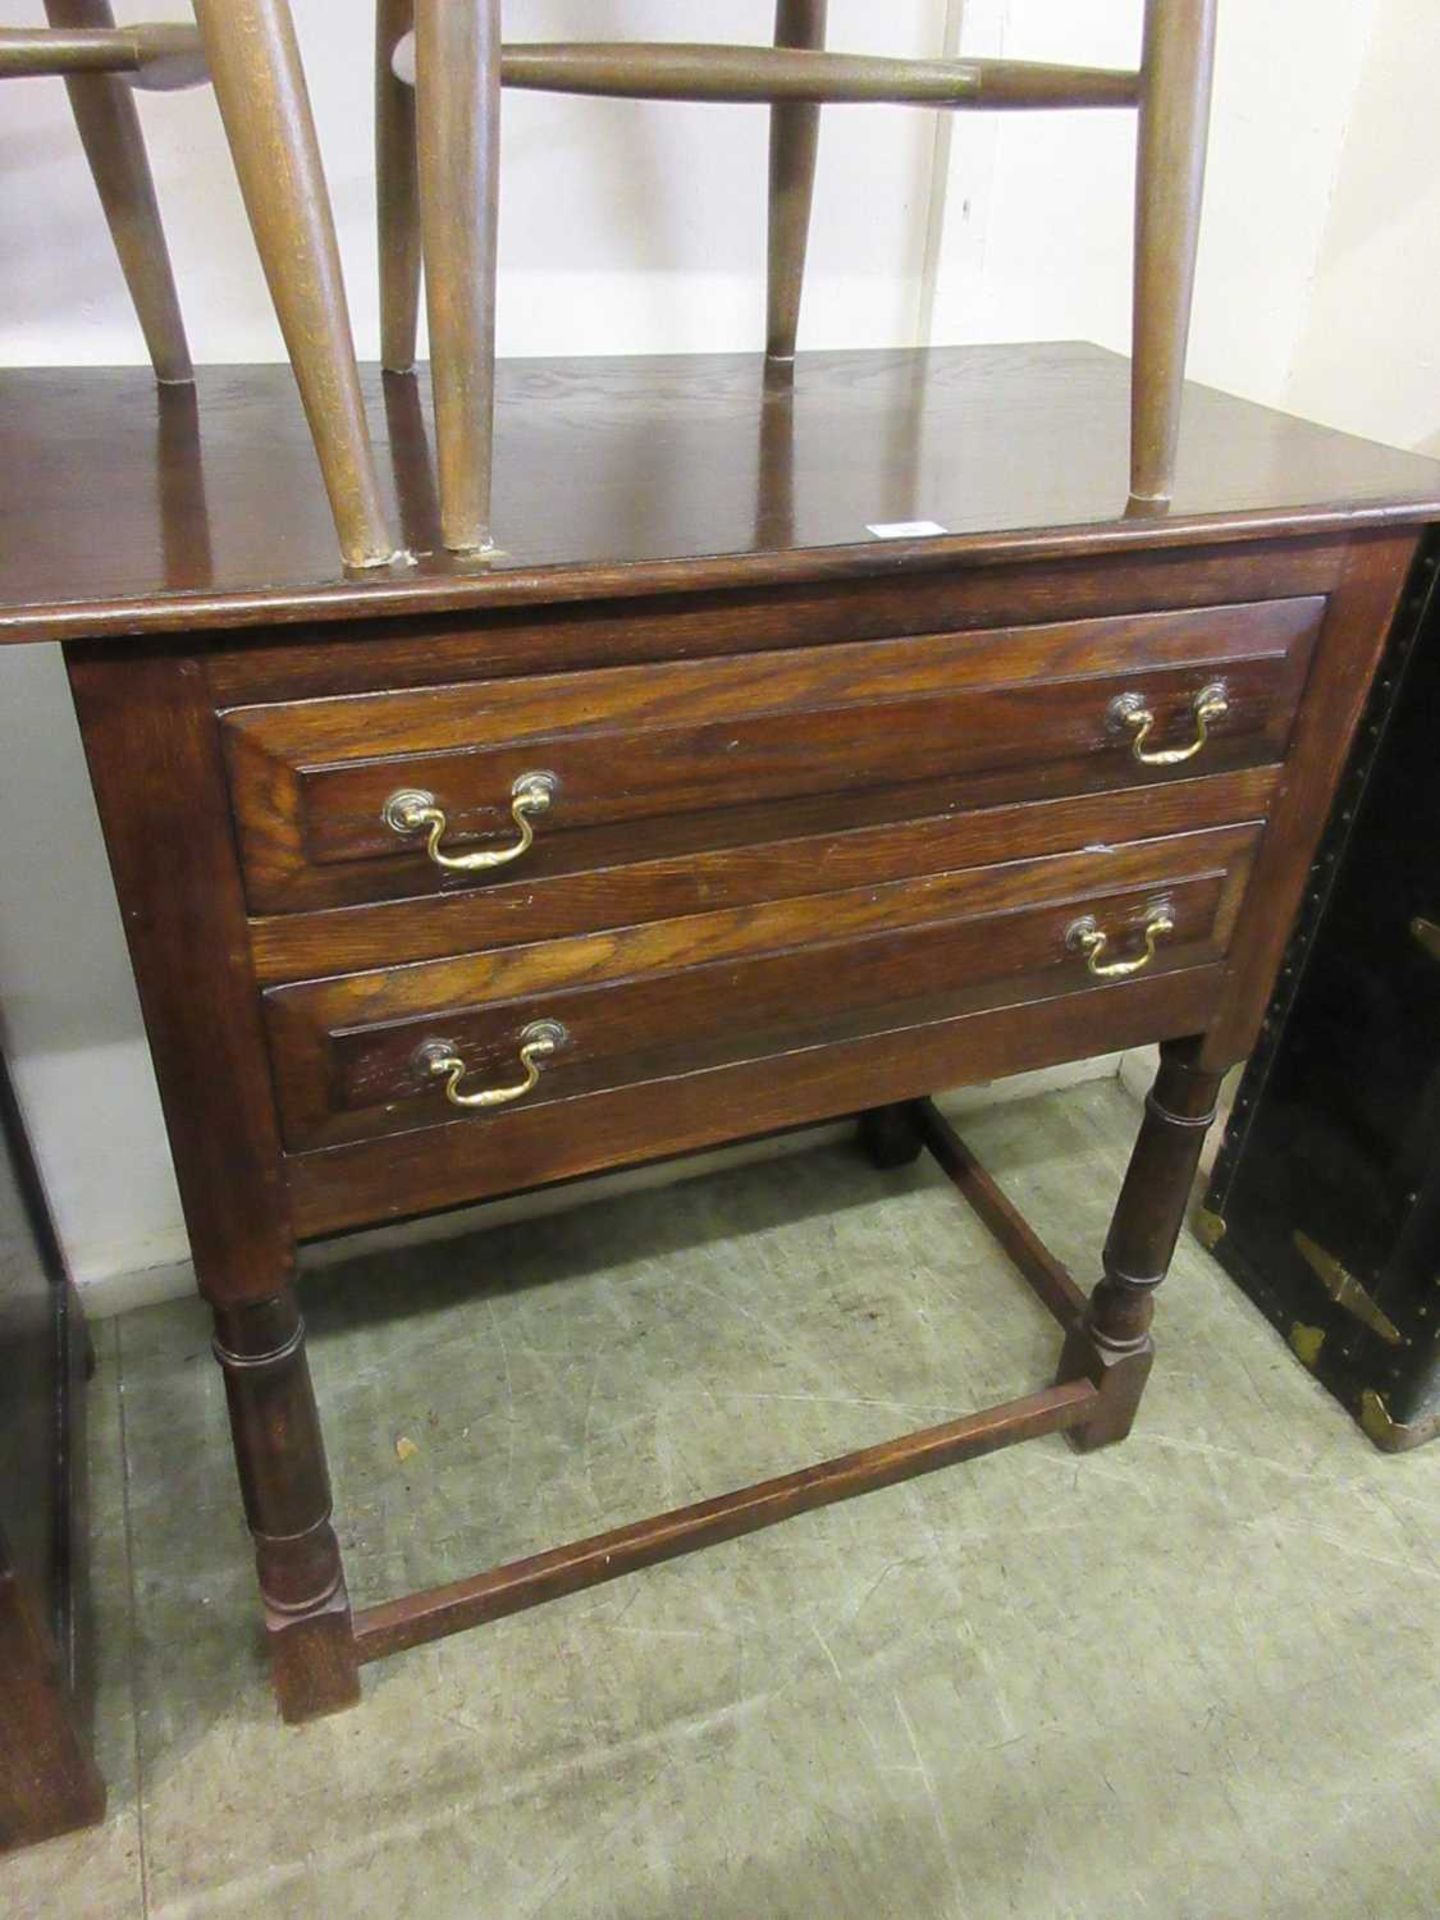 A reproduction oak 18th century style two drawer side table